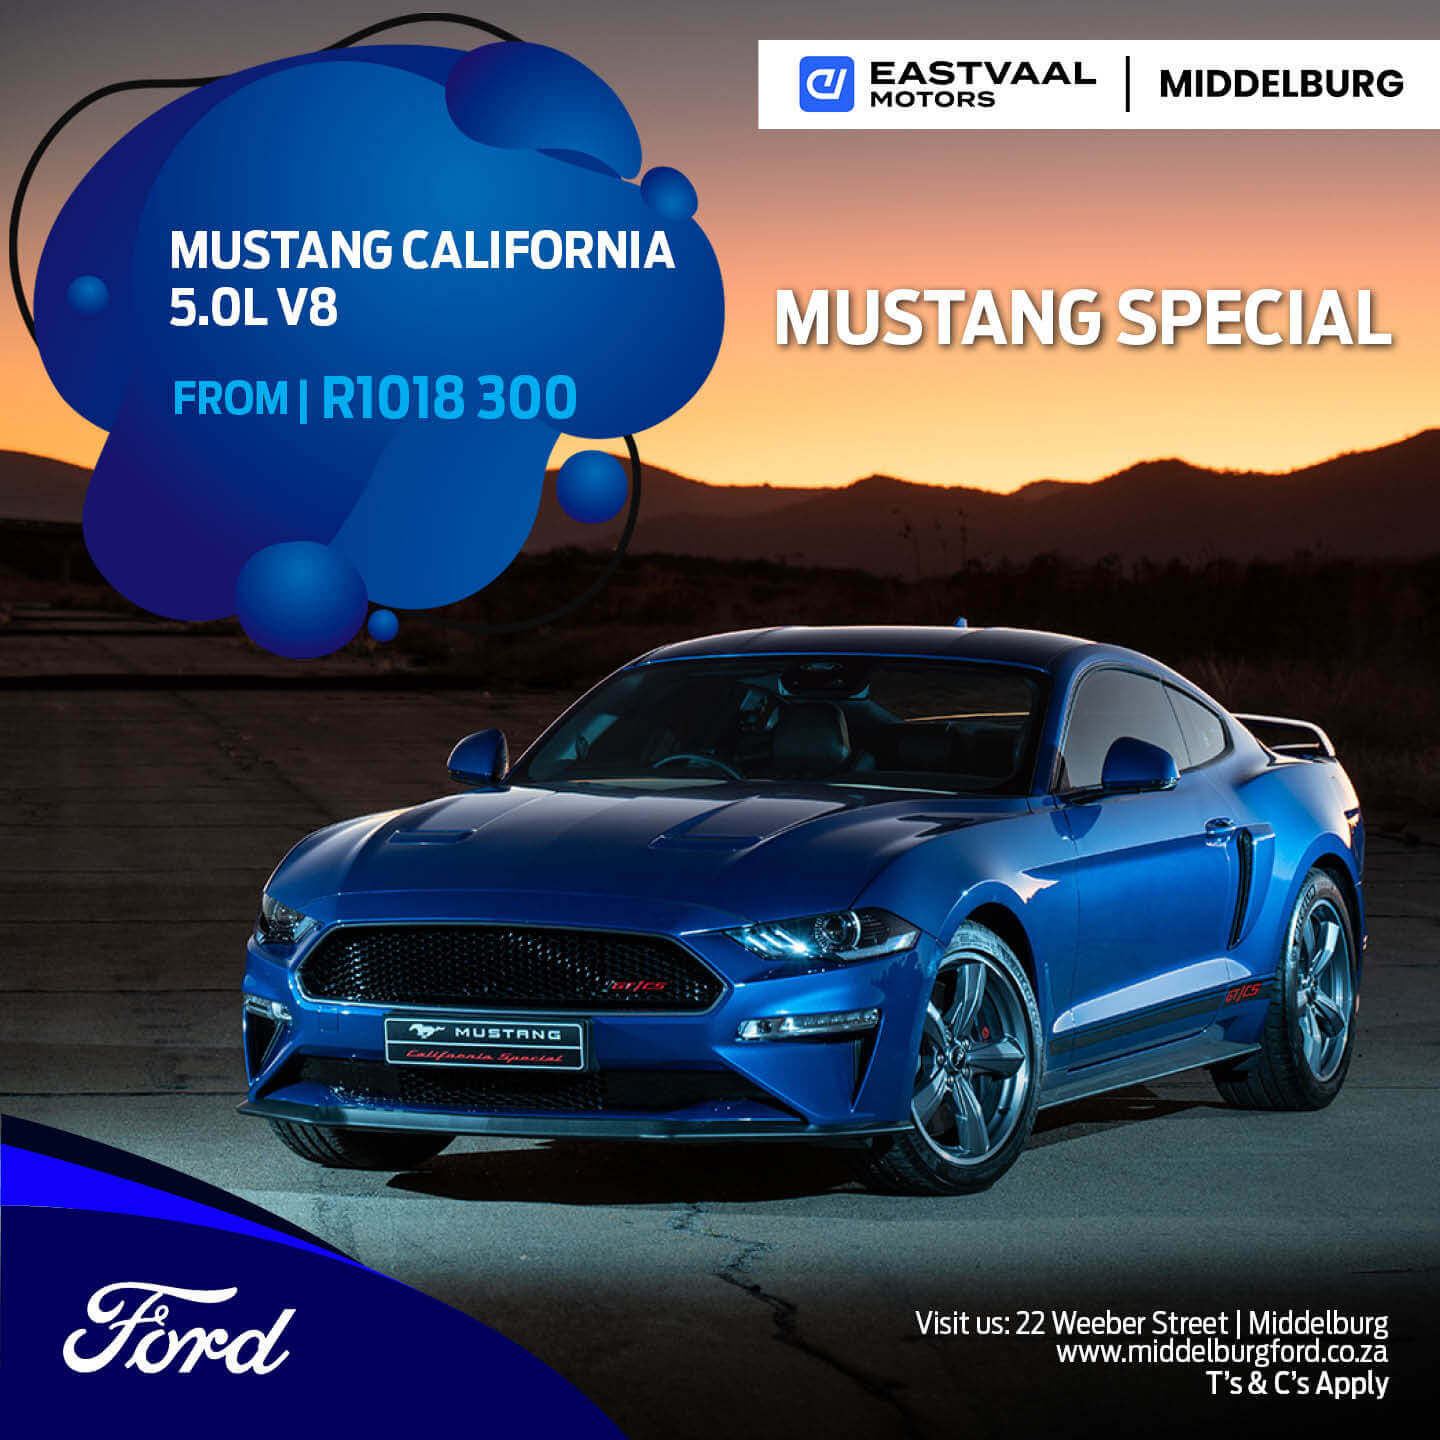 MUSTANG CALIFORNIA image from 